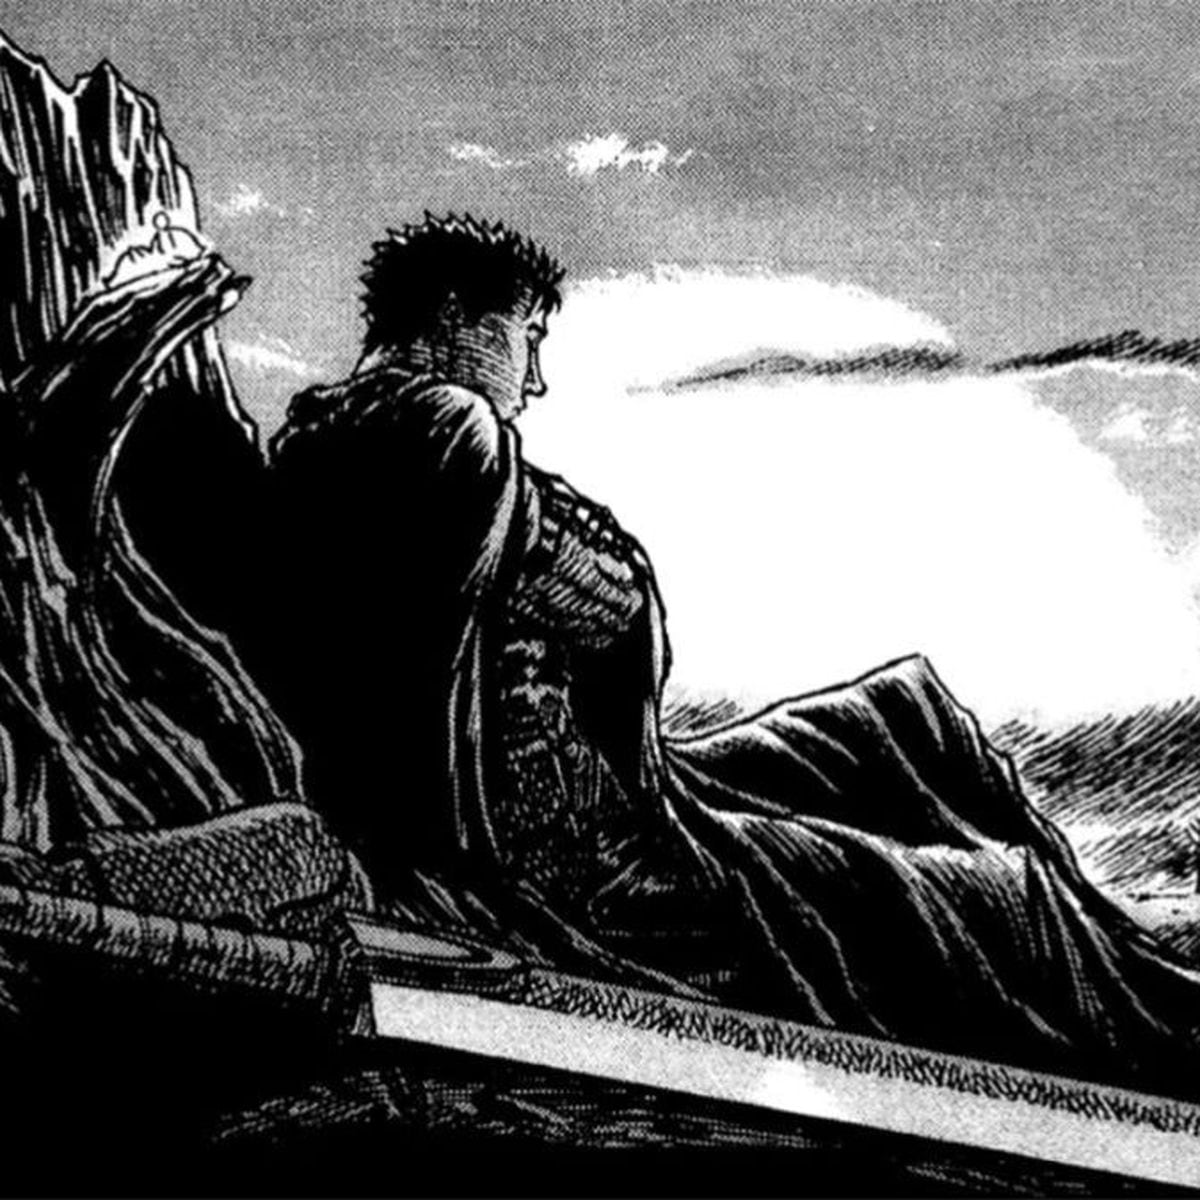 Berserk manga to continue after author's death - Meristation